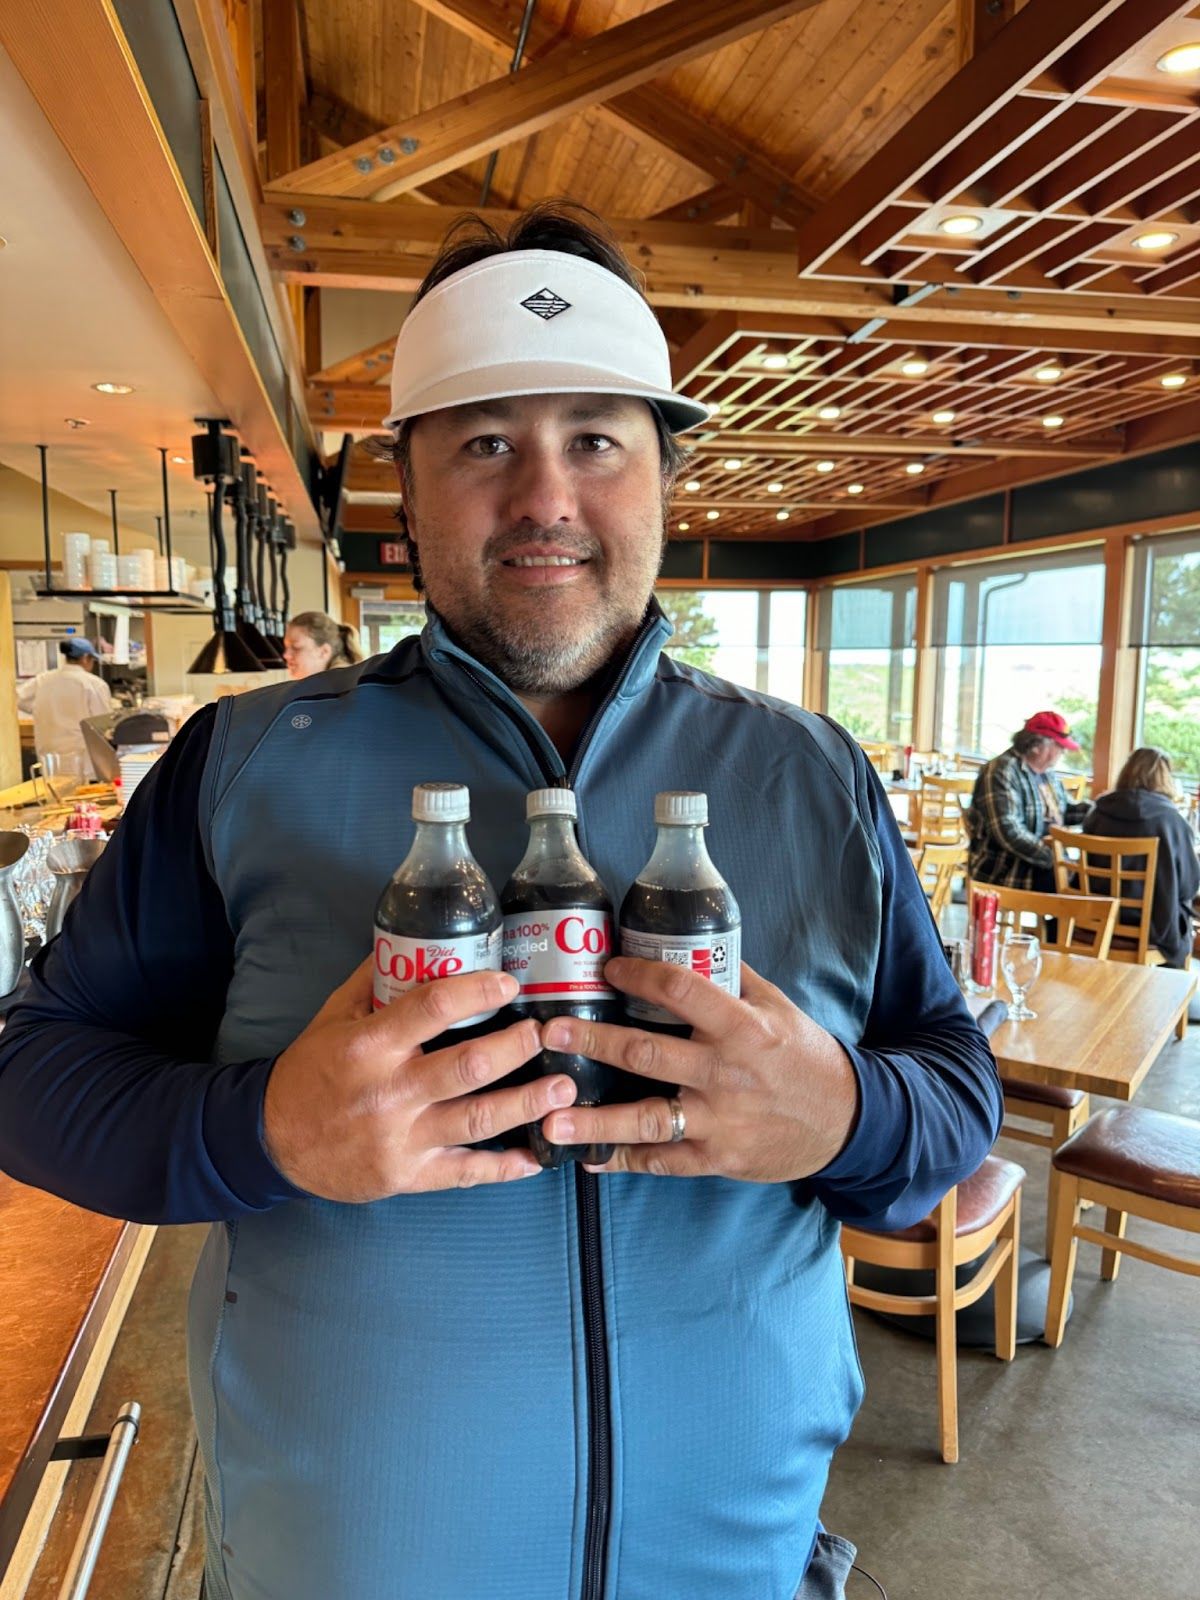 Poosh excitedly holds up three bottles of Diet Coke.